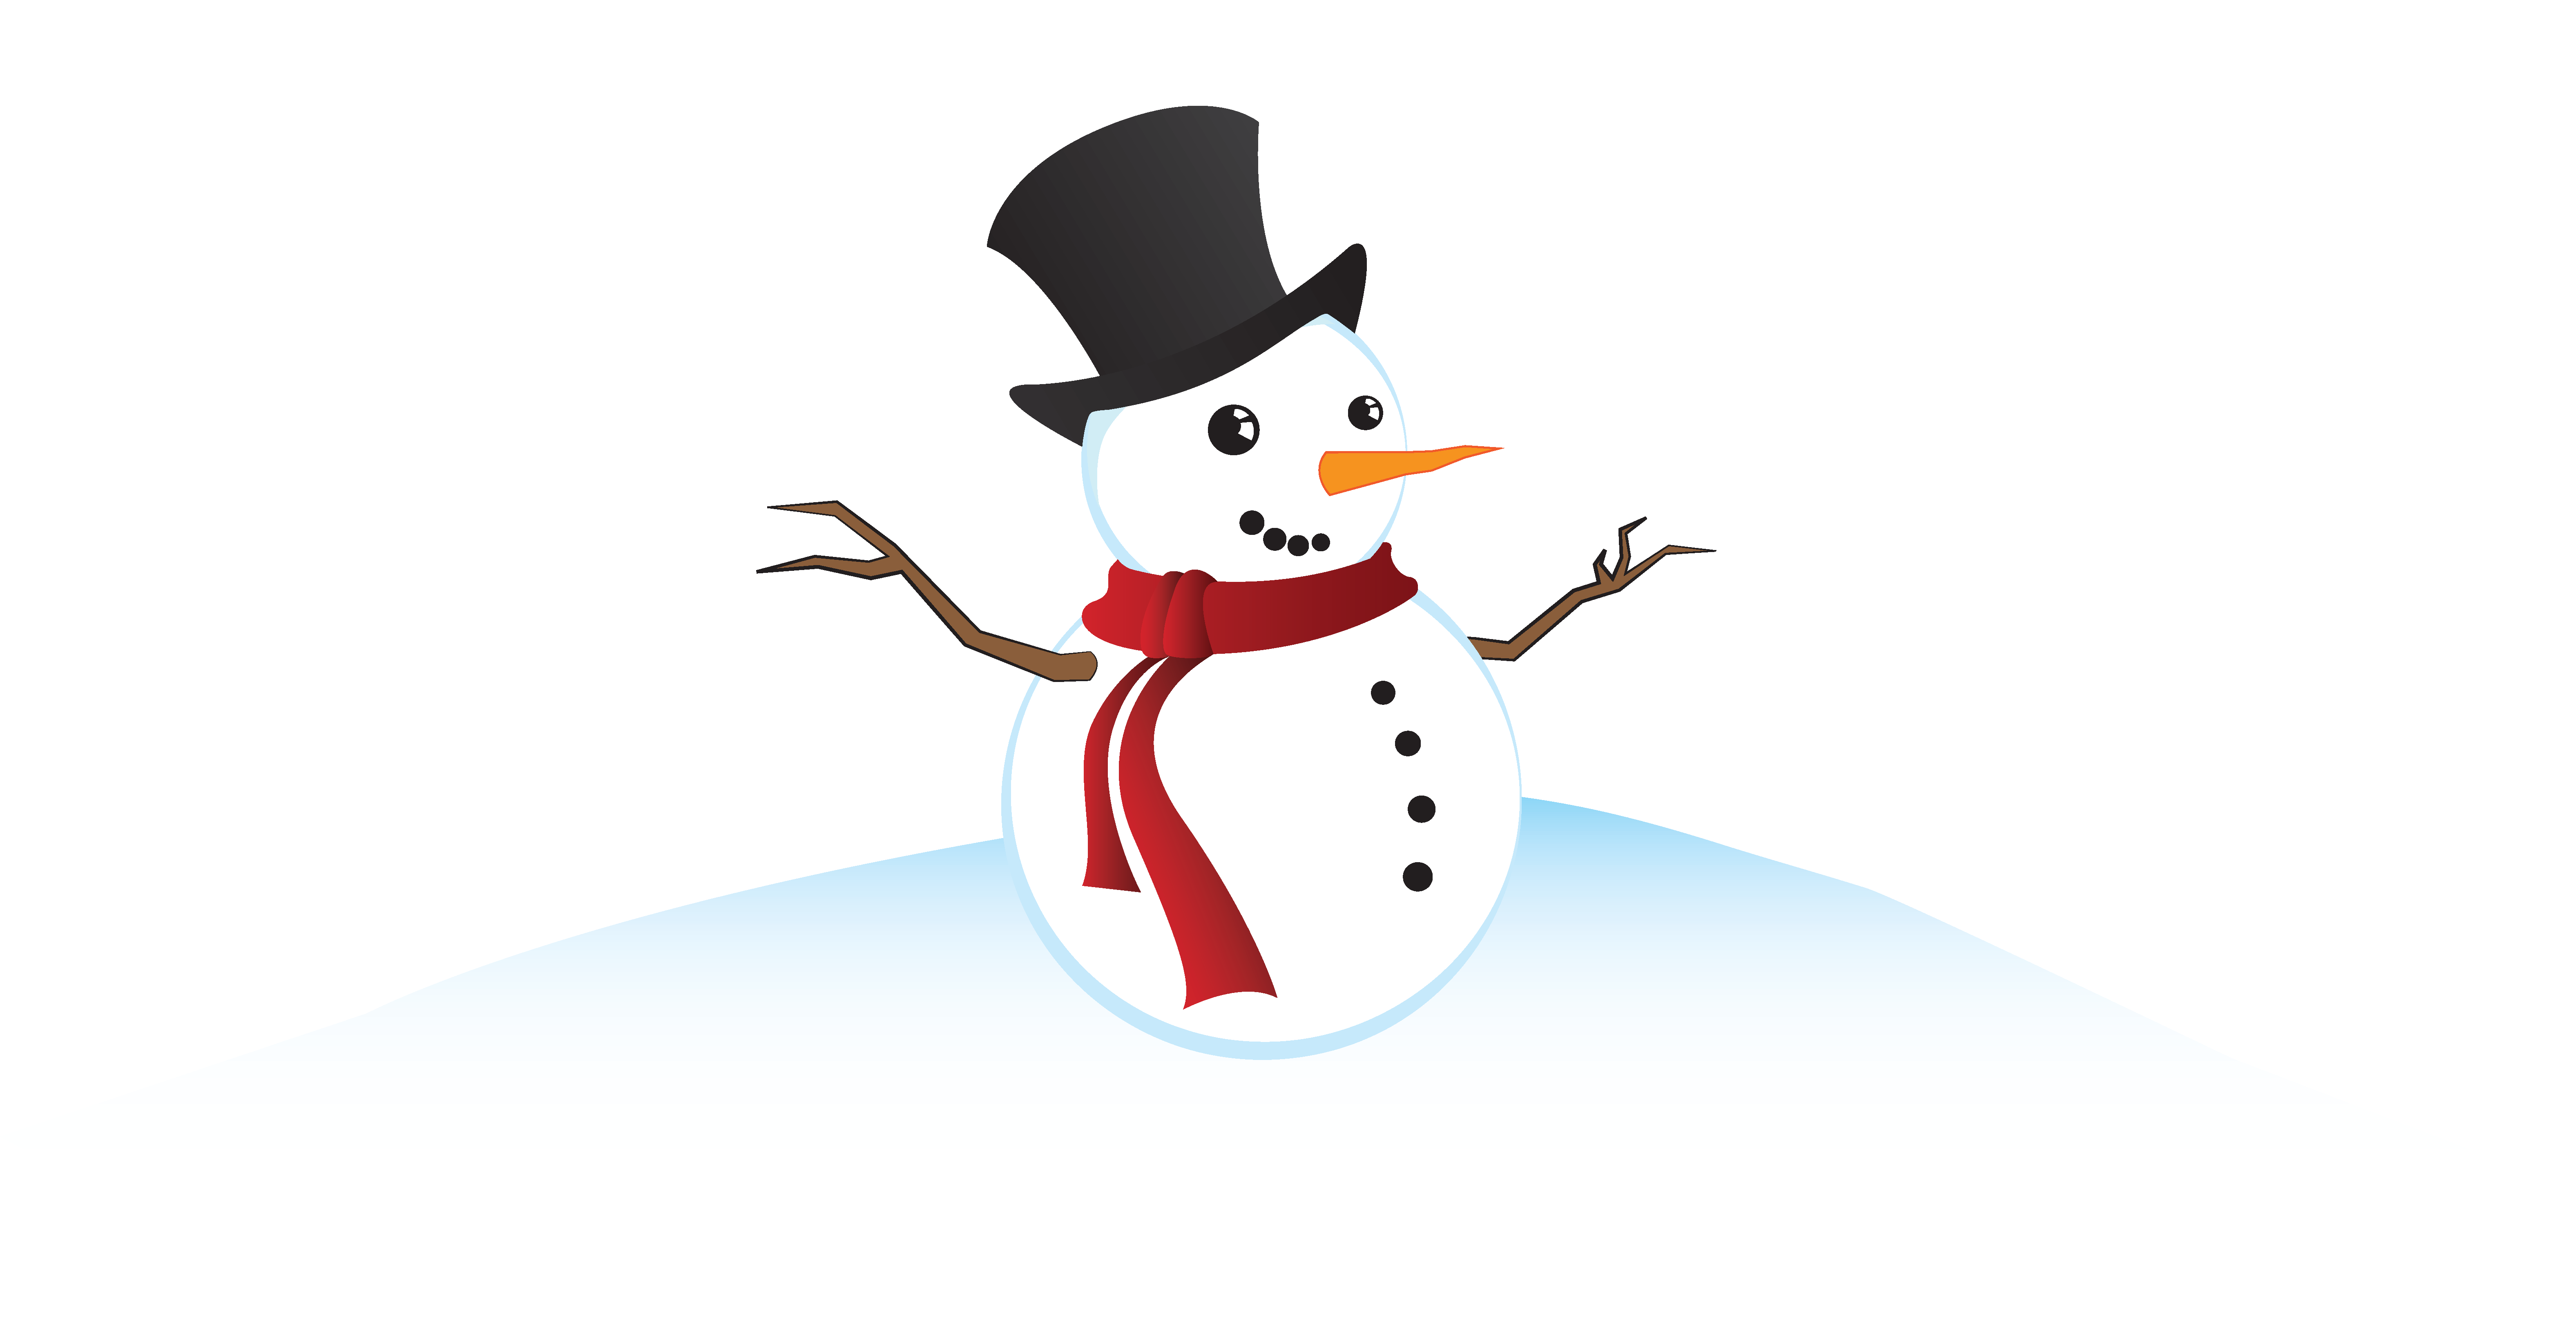 Eye clipart snowman. The great building competition